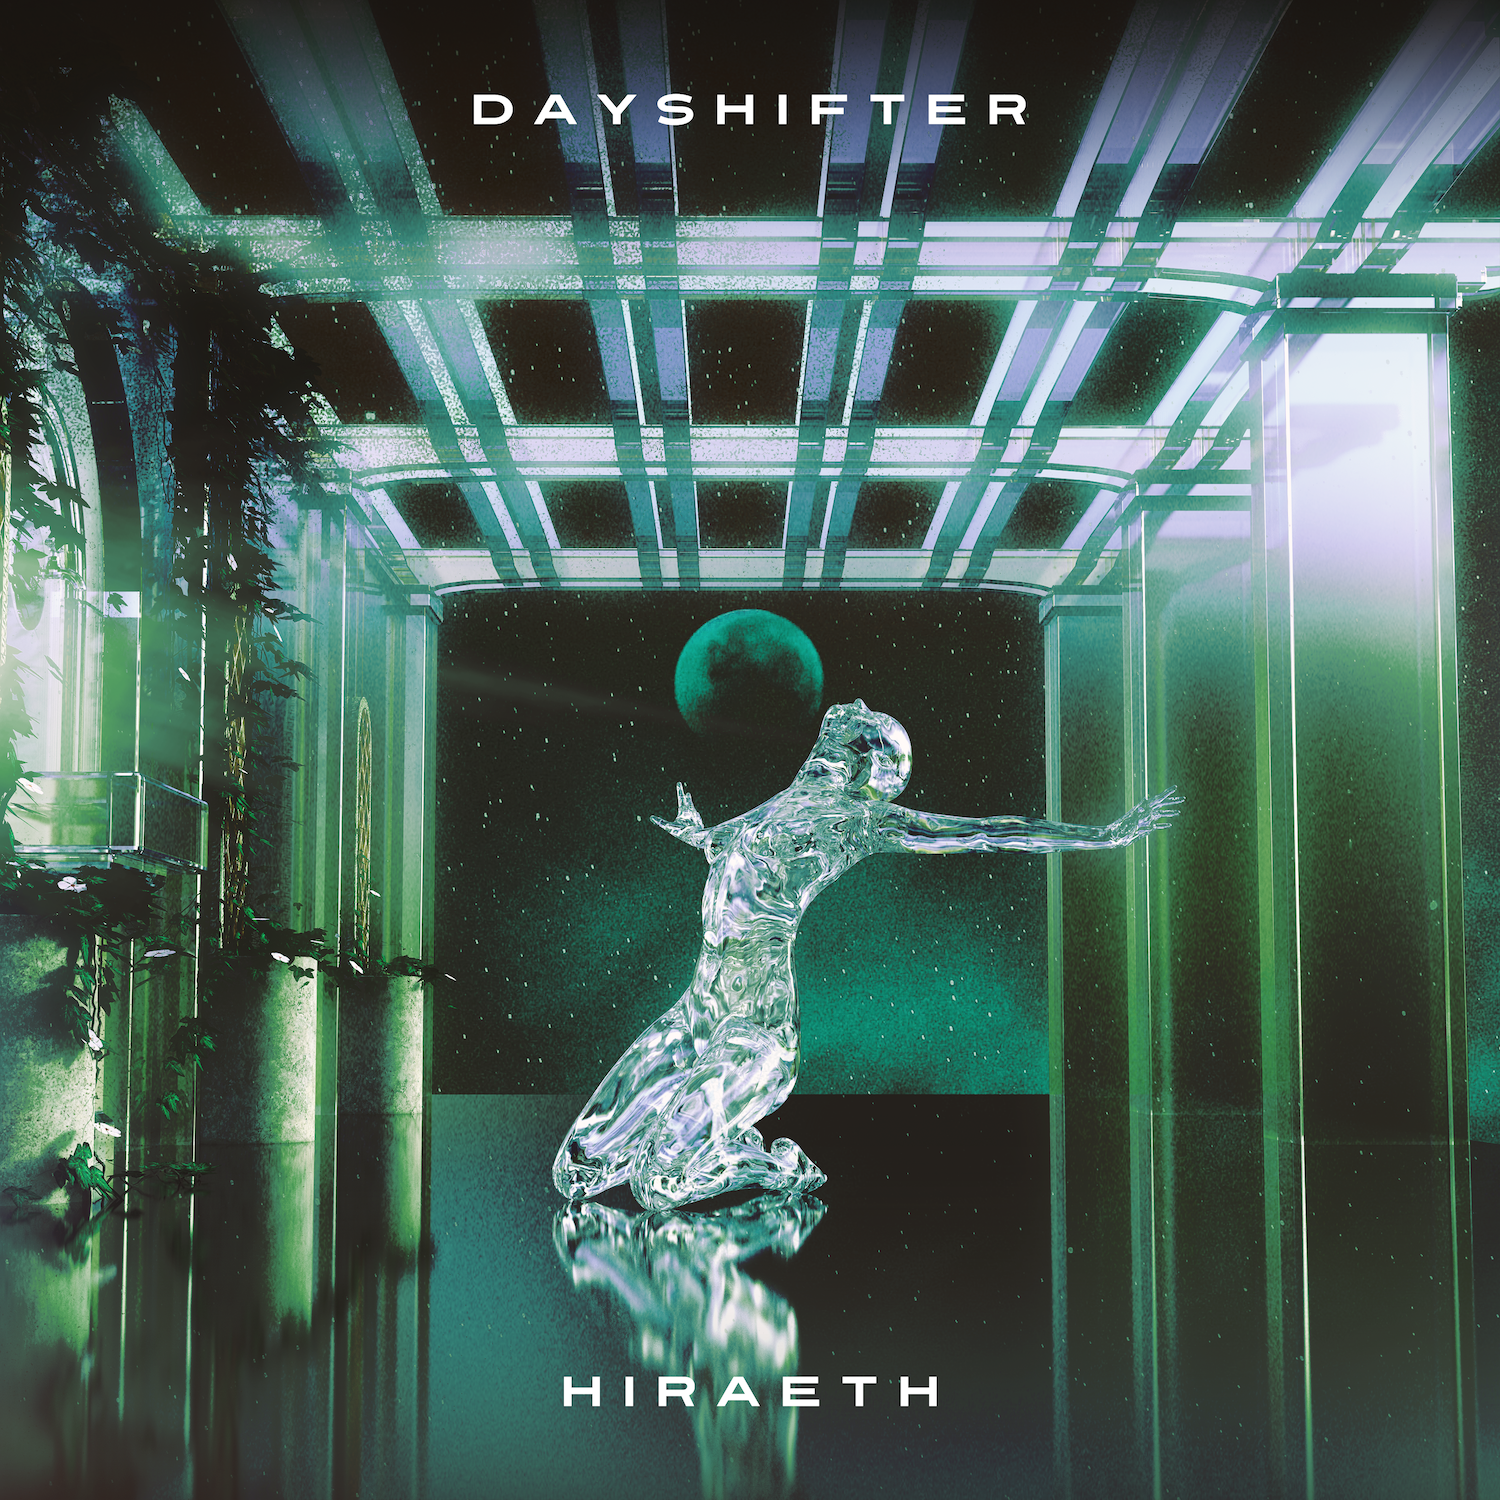 DEBUT ALBUM REVIEW: Hiraeth by Dayshifter